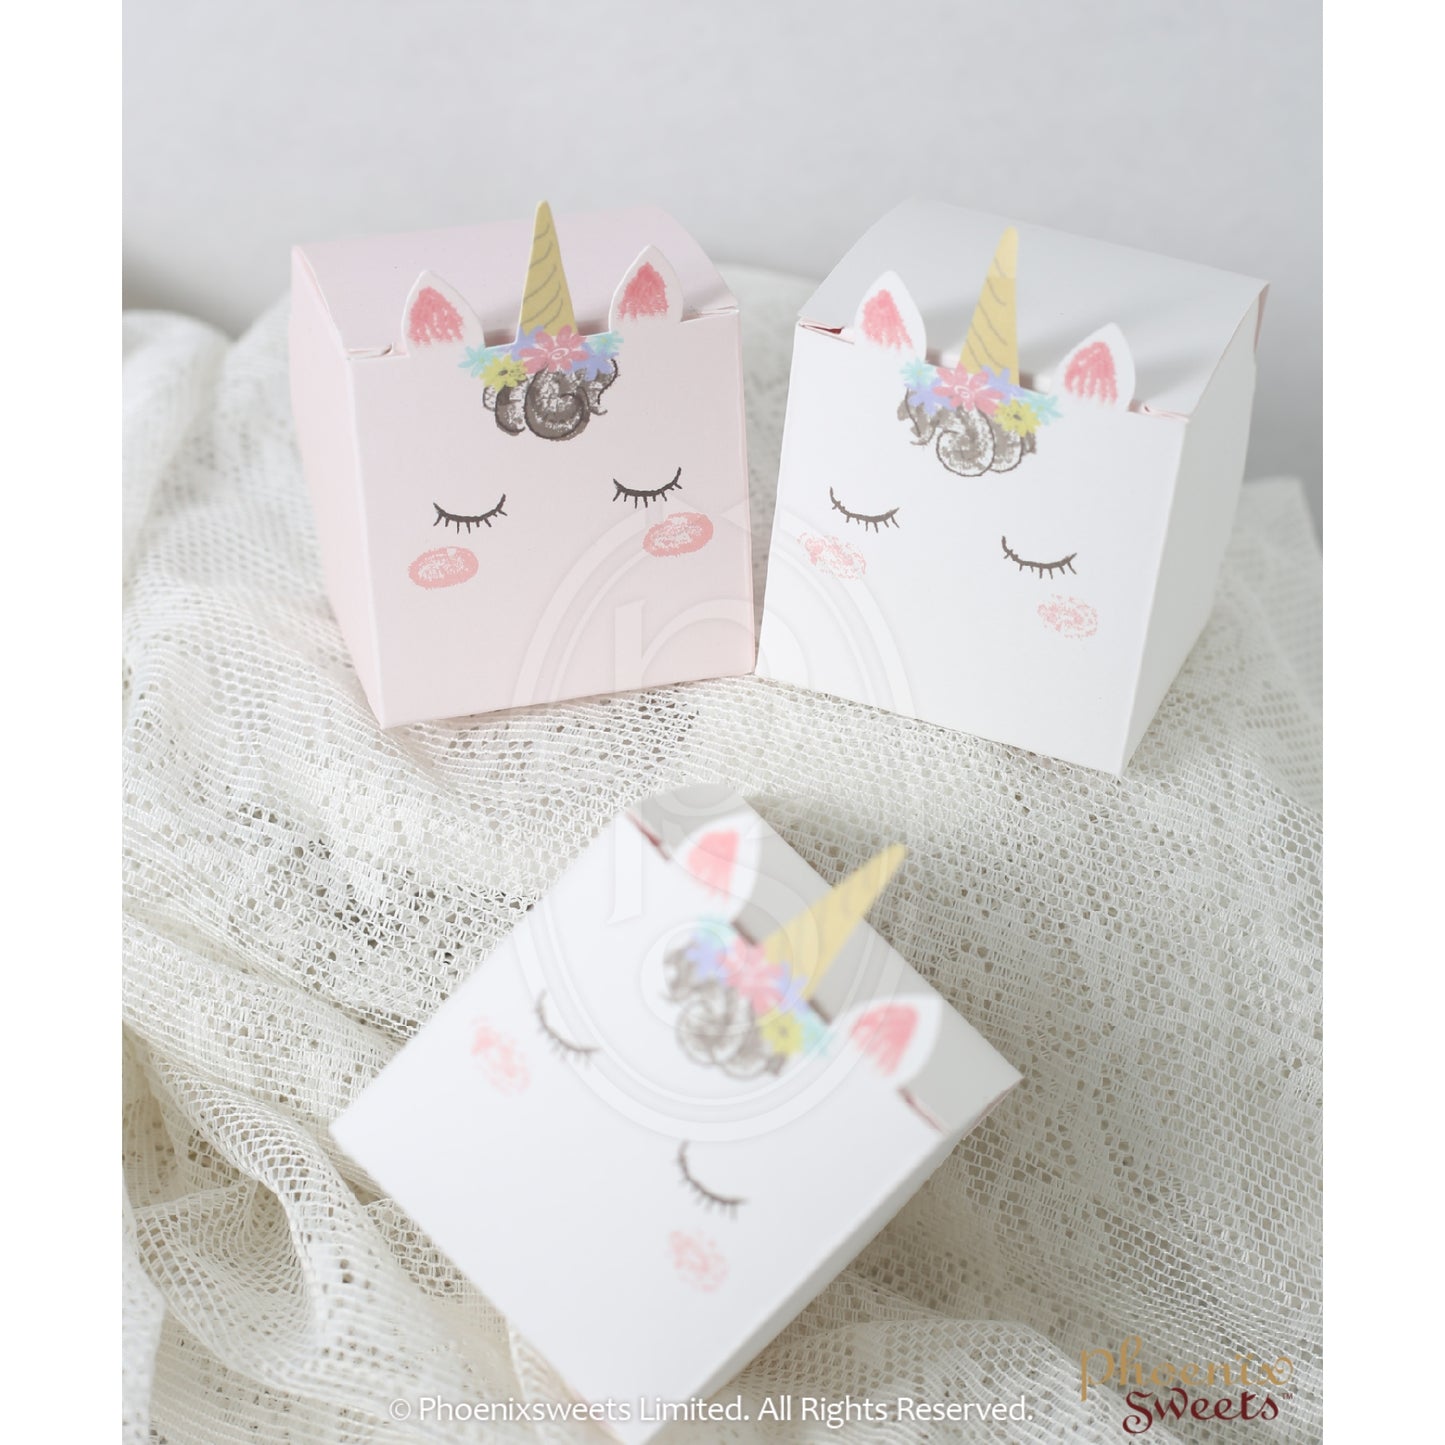 Cookie - Selected Homemade Cookie (Cute Unicorn Pack)